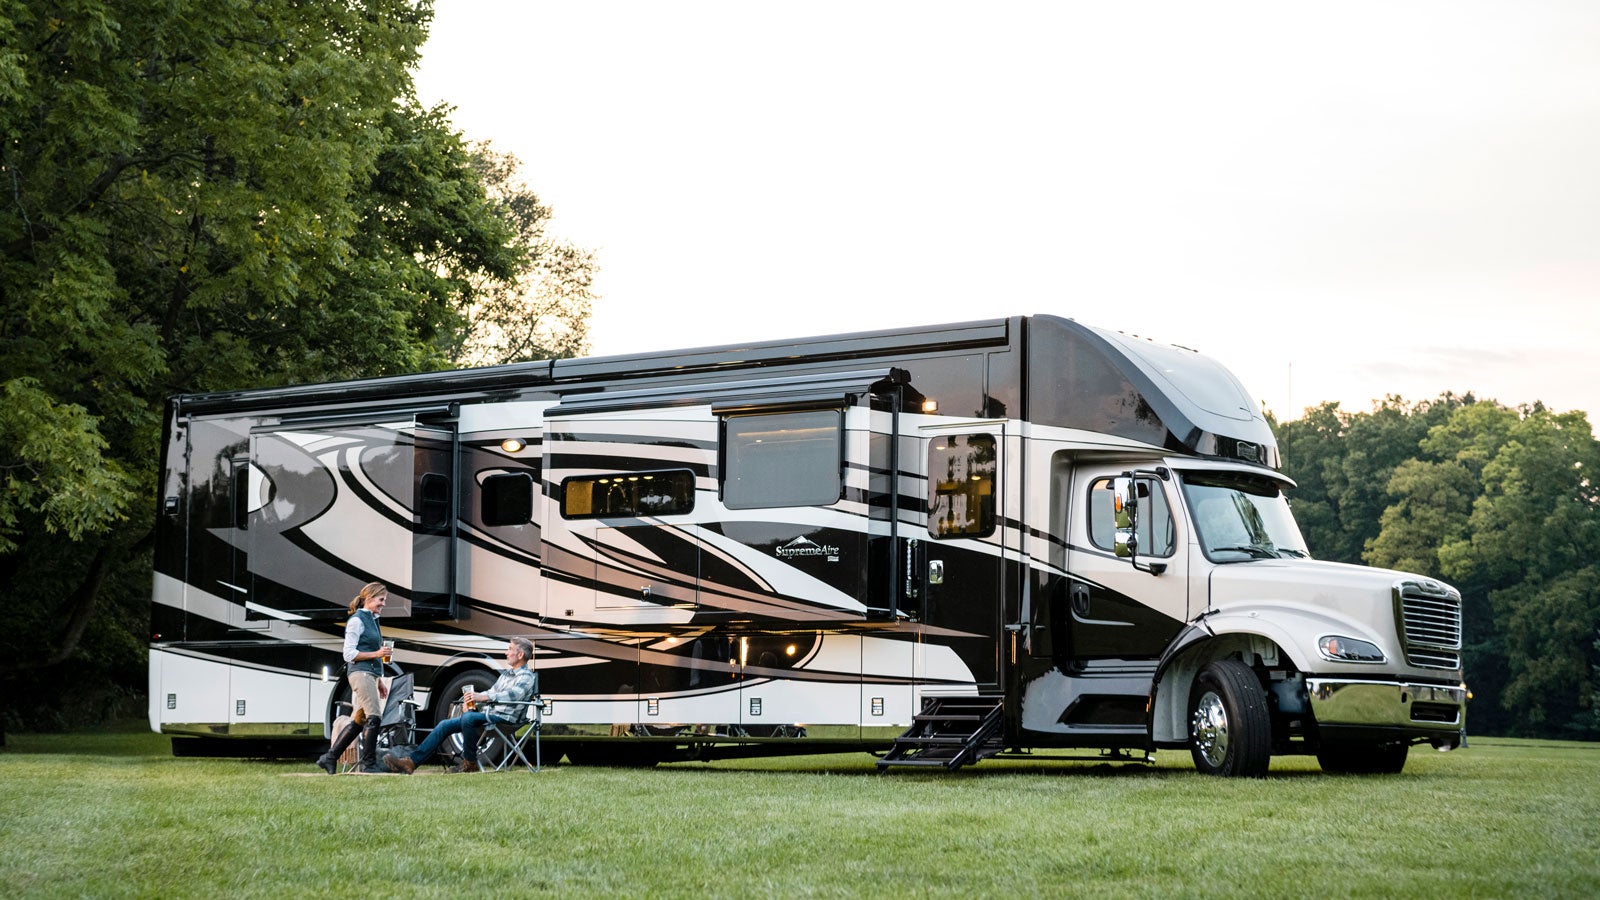 U.S. RV Makers Can’t Keep Up With Demand